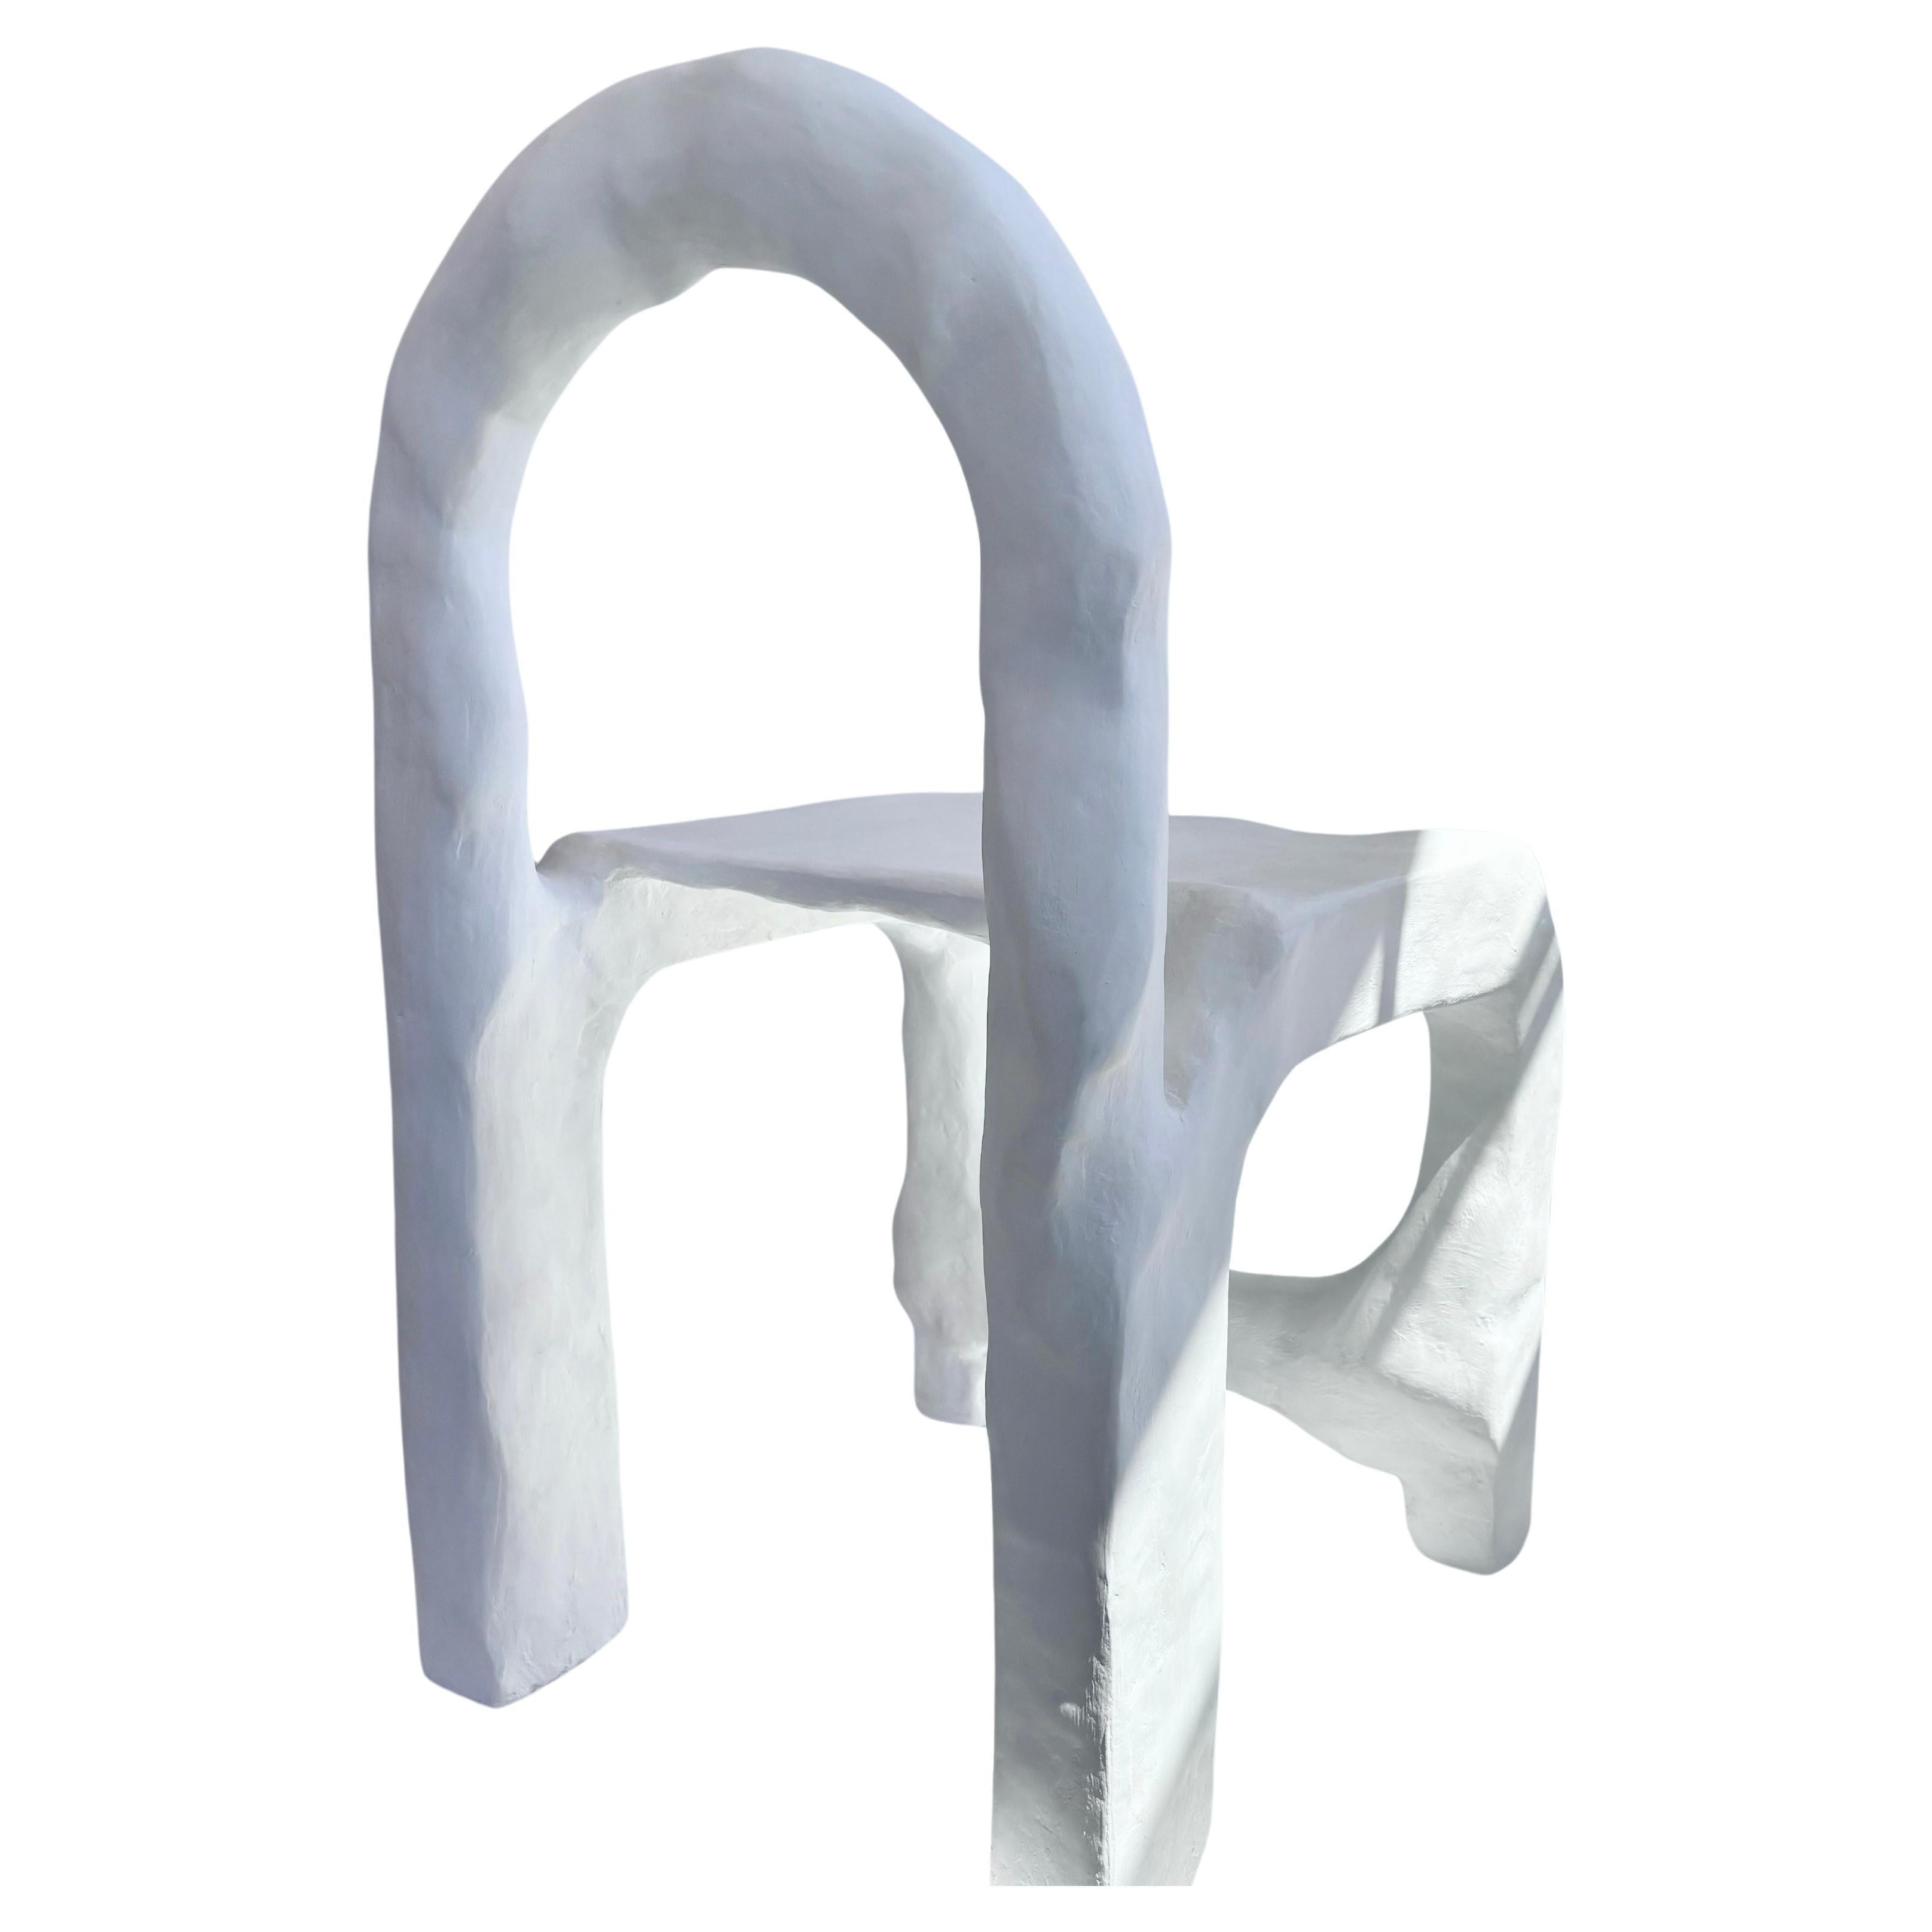 Biomorphic Line by Studio Chora, Functional Sculpture, White Plaster Chair In New Condition For Sale In Albuquerque, NM